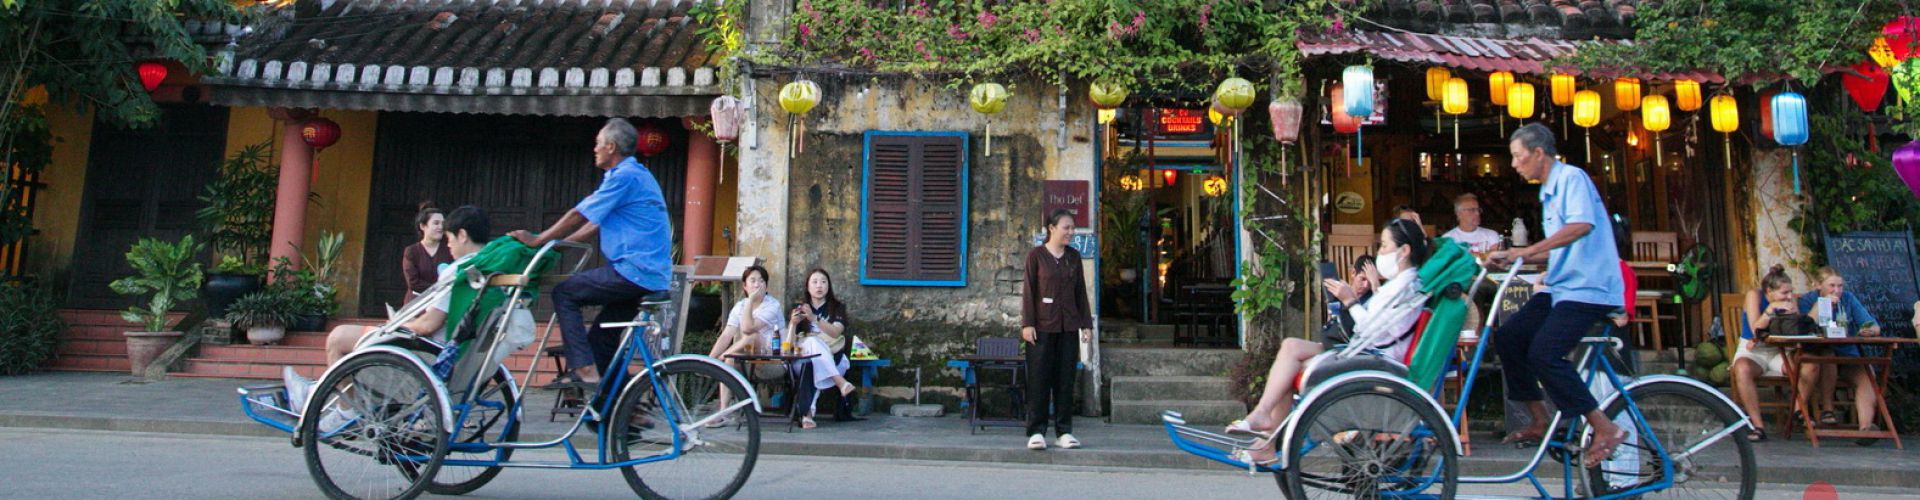 Top Attractions in Hoi An